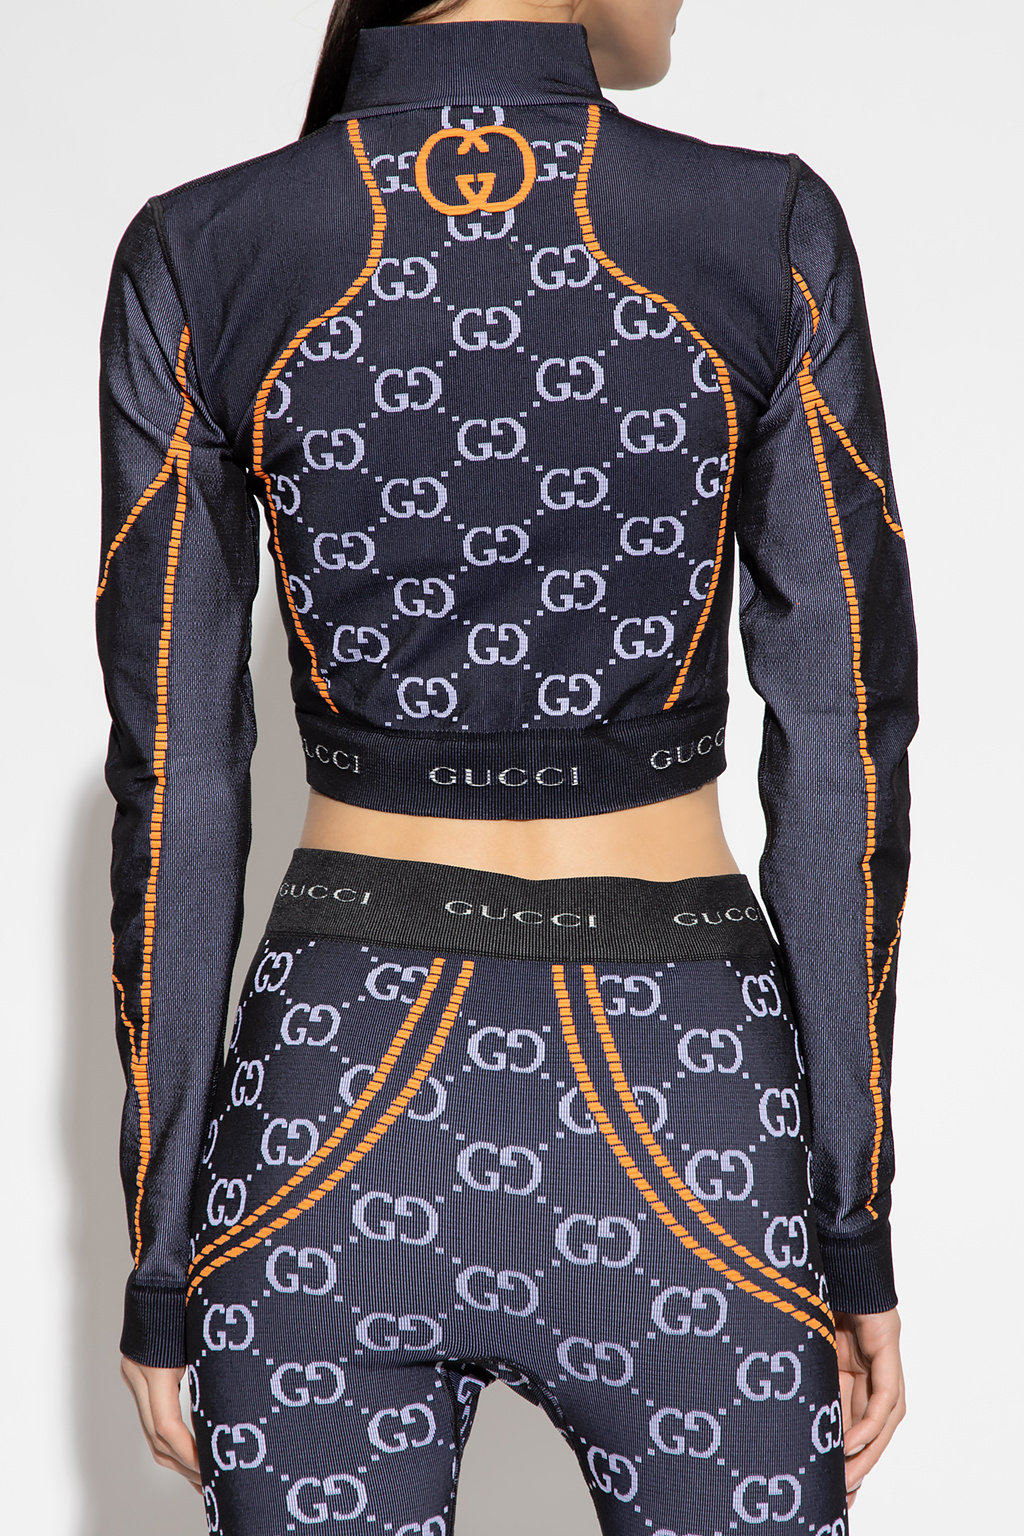 Gucci Crop top with monogram, Women's Clothing